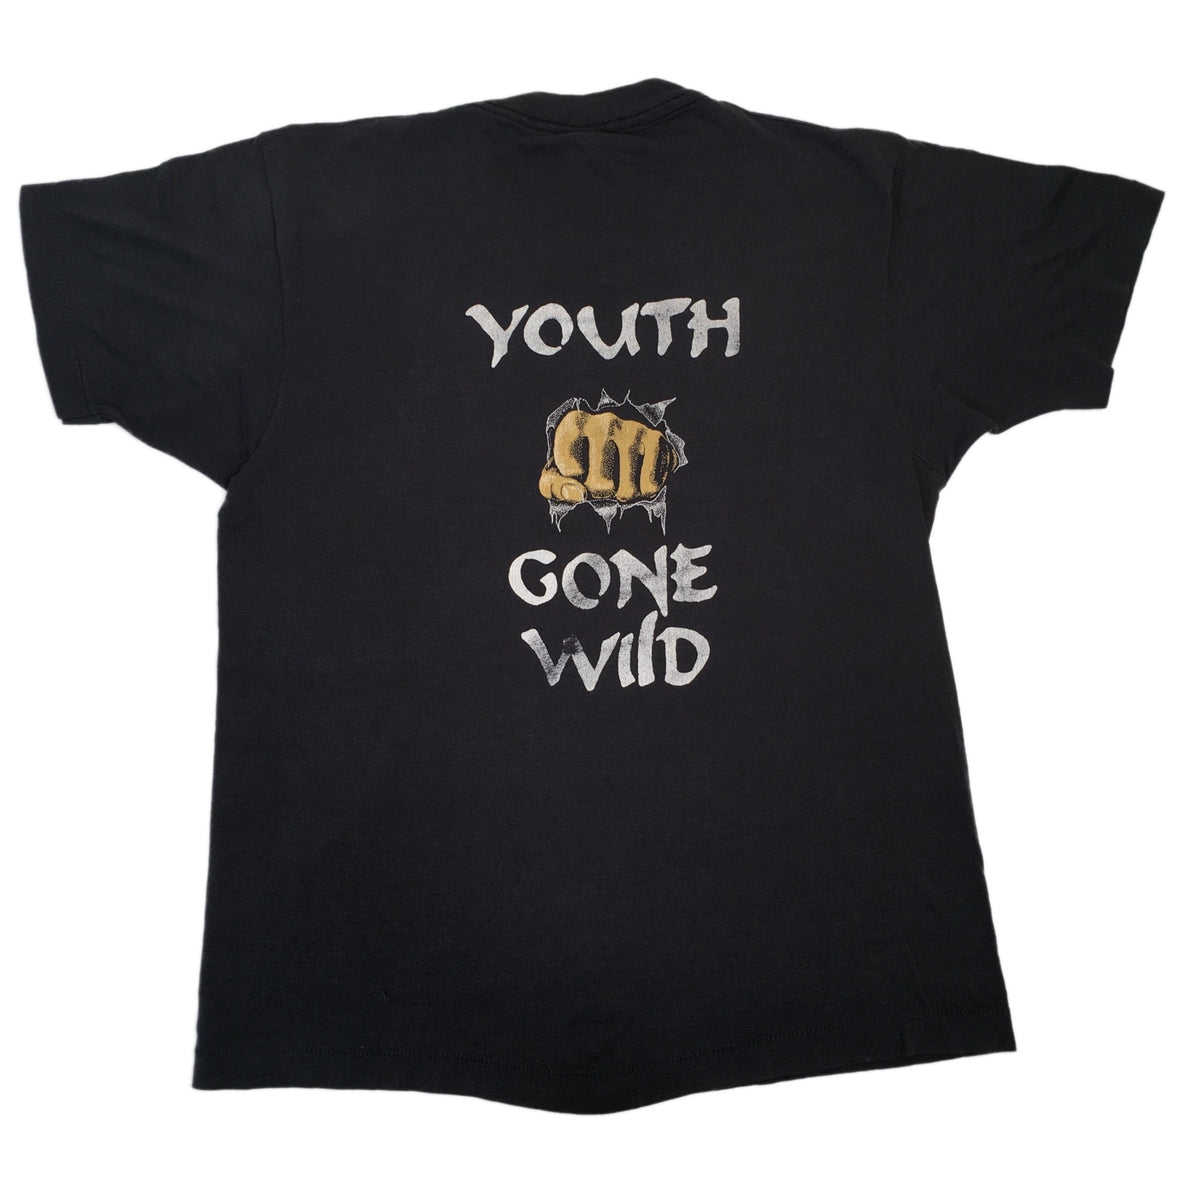 Vintage Skid row &quot;Youth Gone Wild&quot; T-Shirt - jointcustodydc